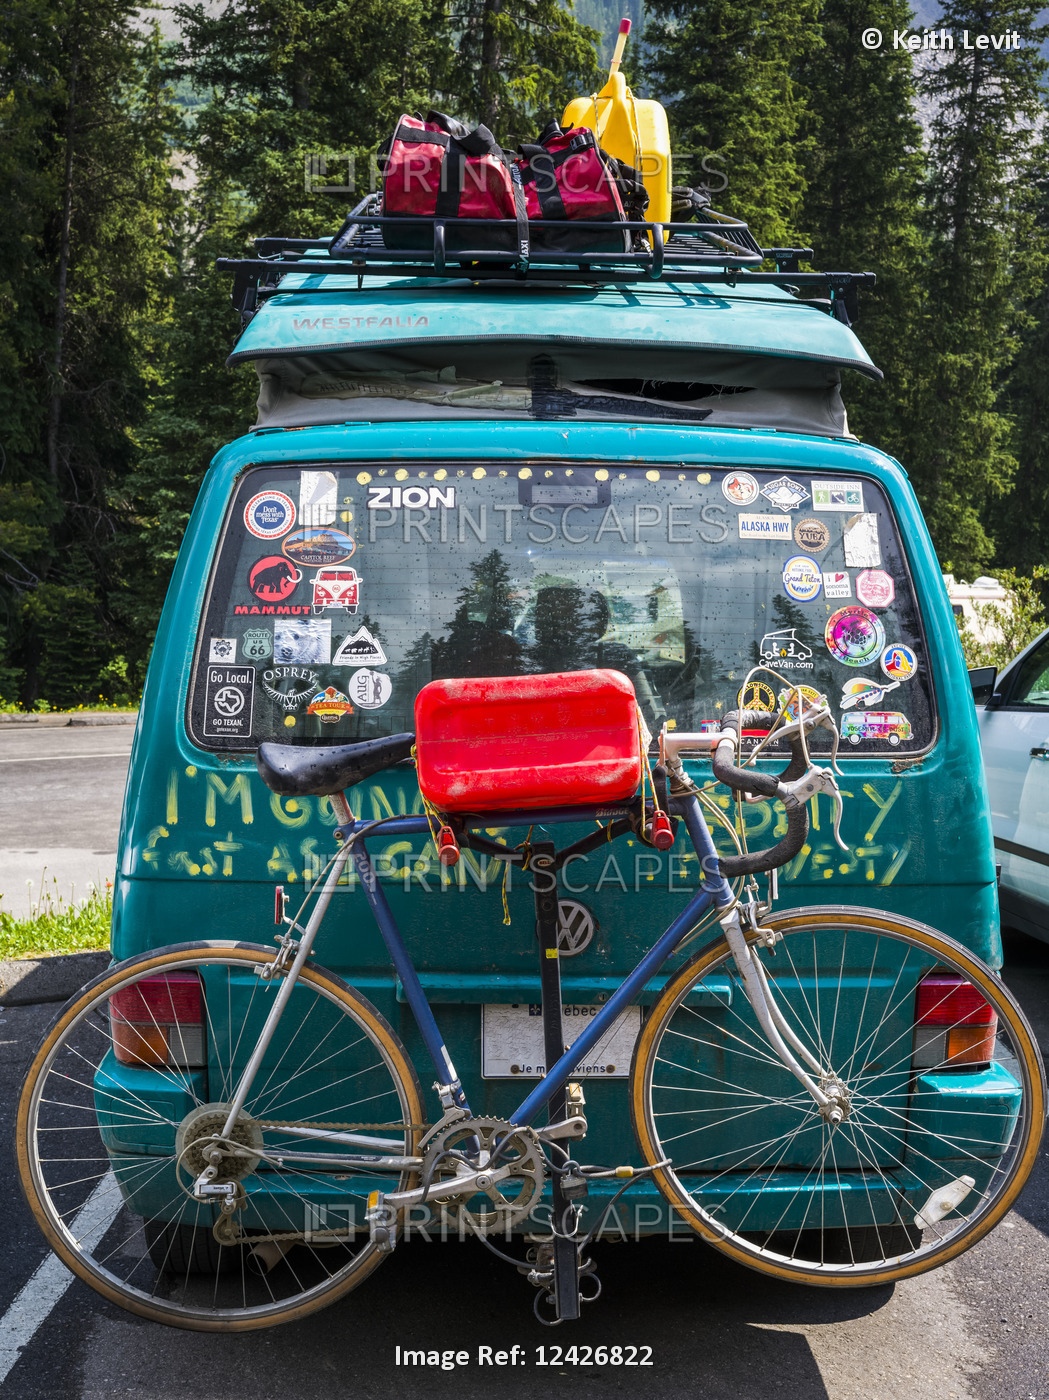 A camper van in a parking lot covered with bumper stickers and graffiti, and ...